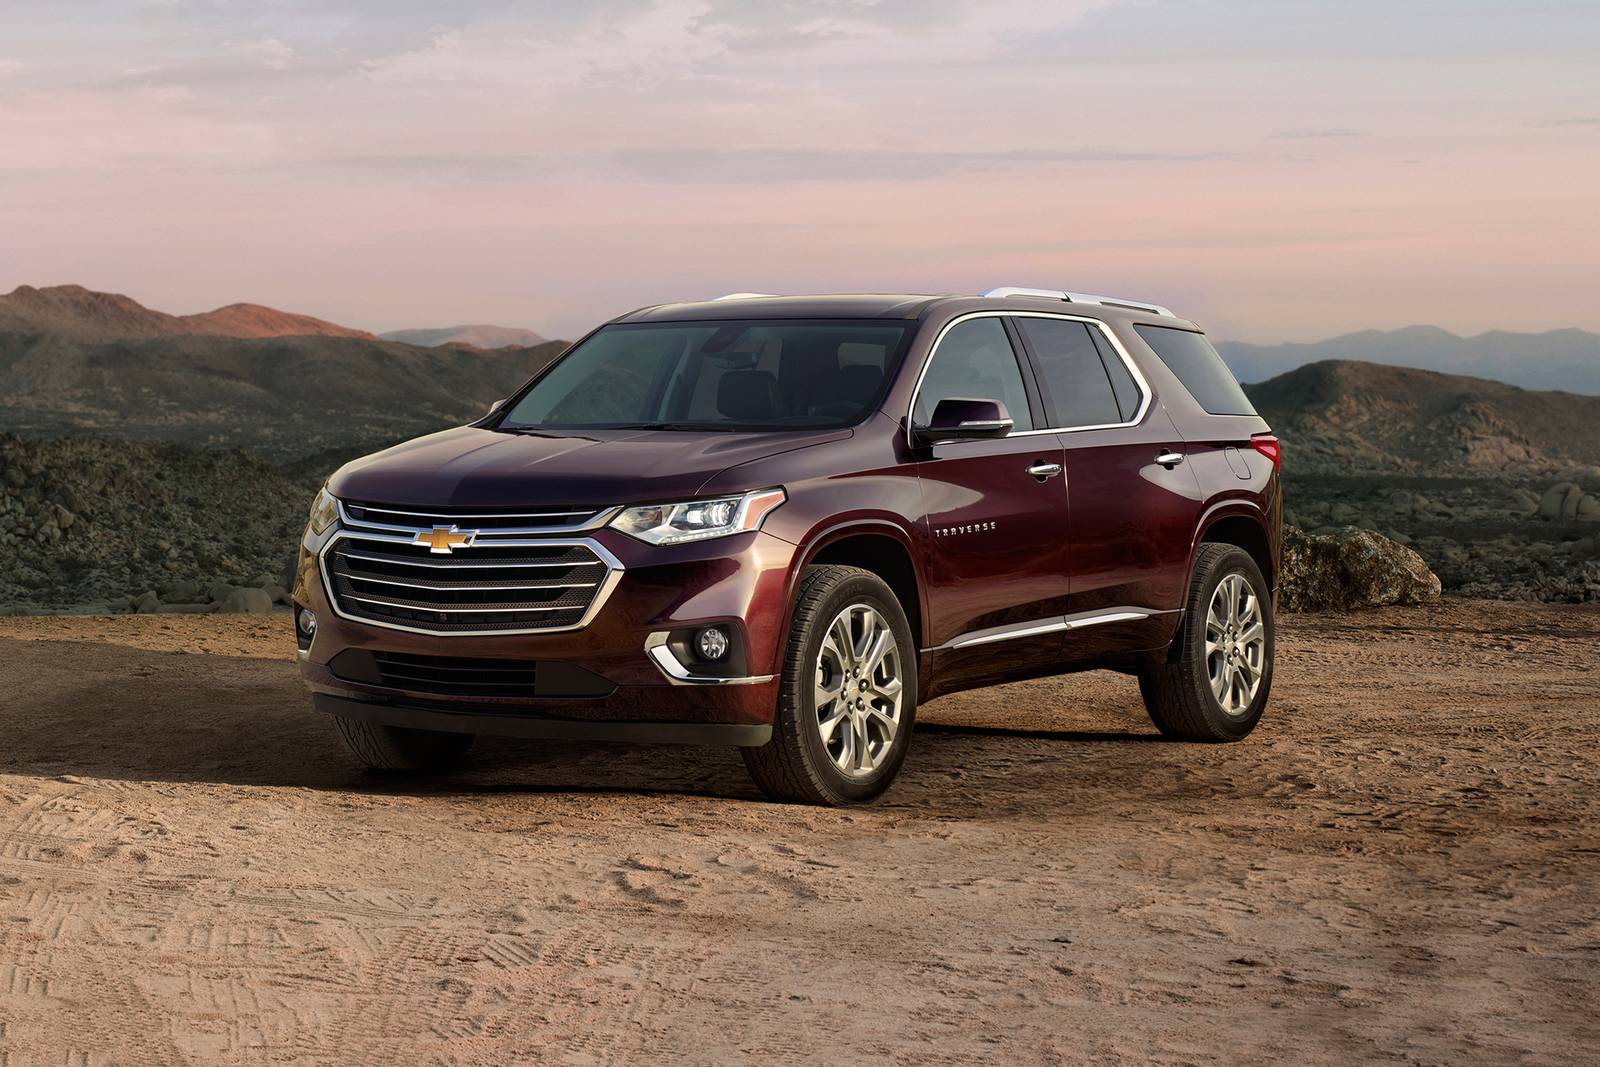 2018 Chevy Traverse Review & Ratings | Edmunds